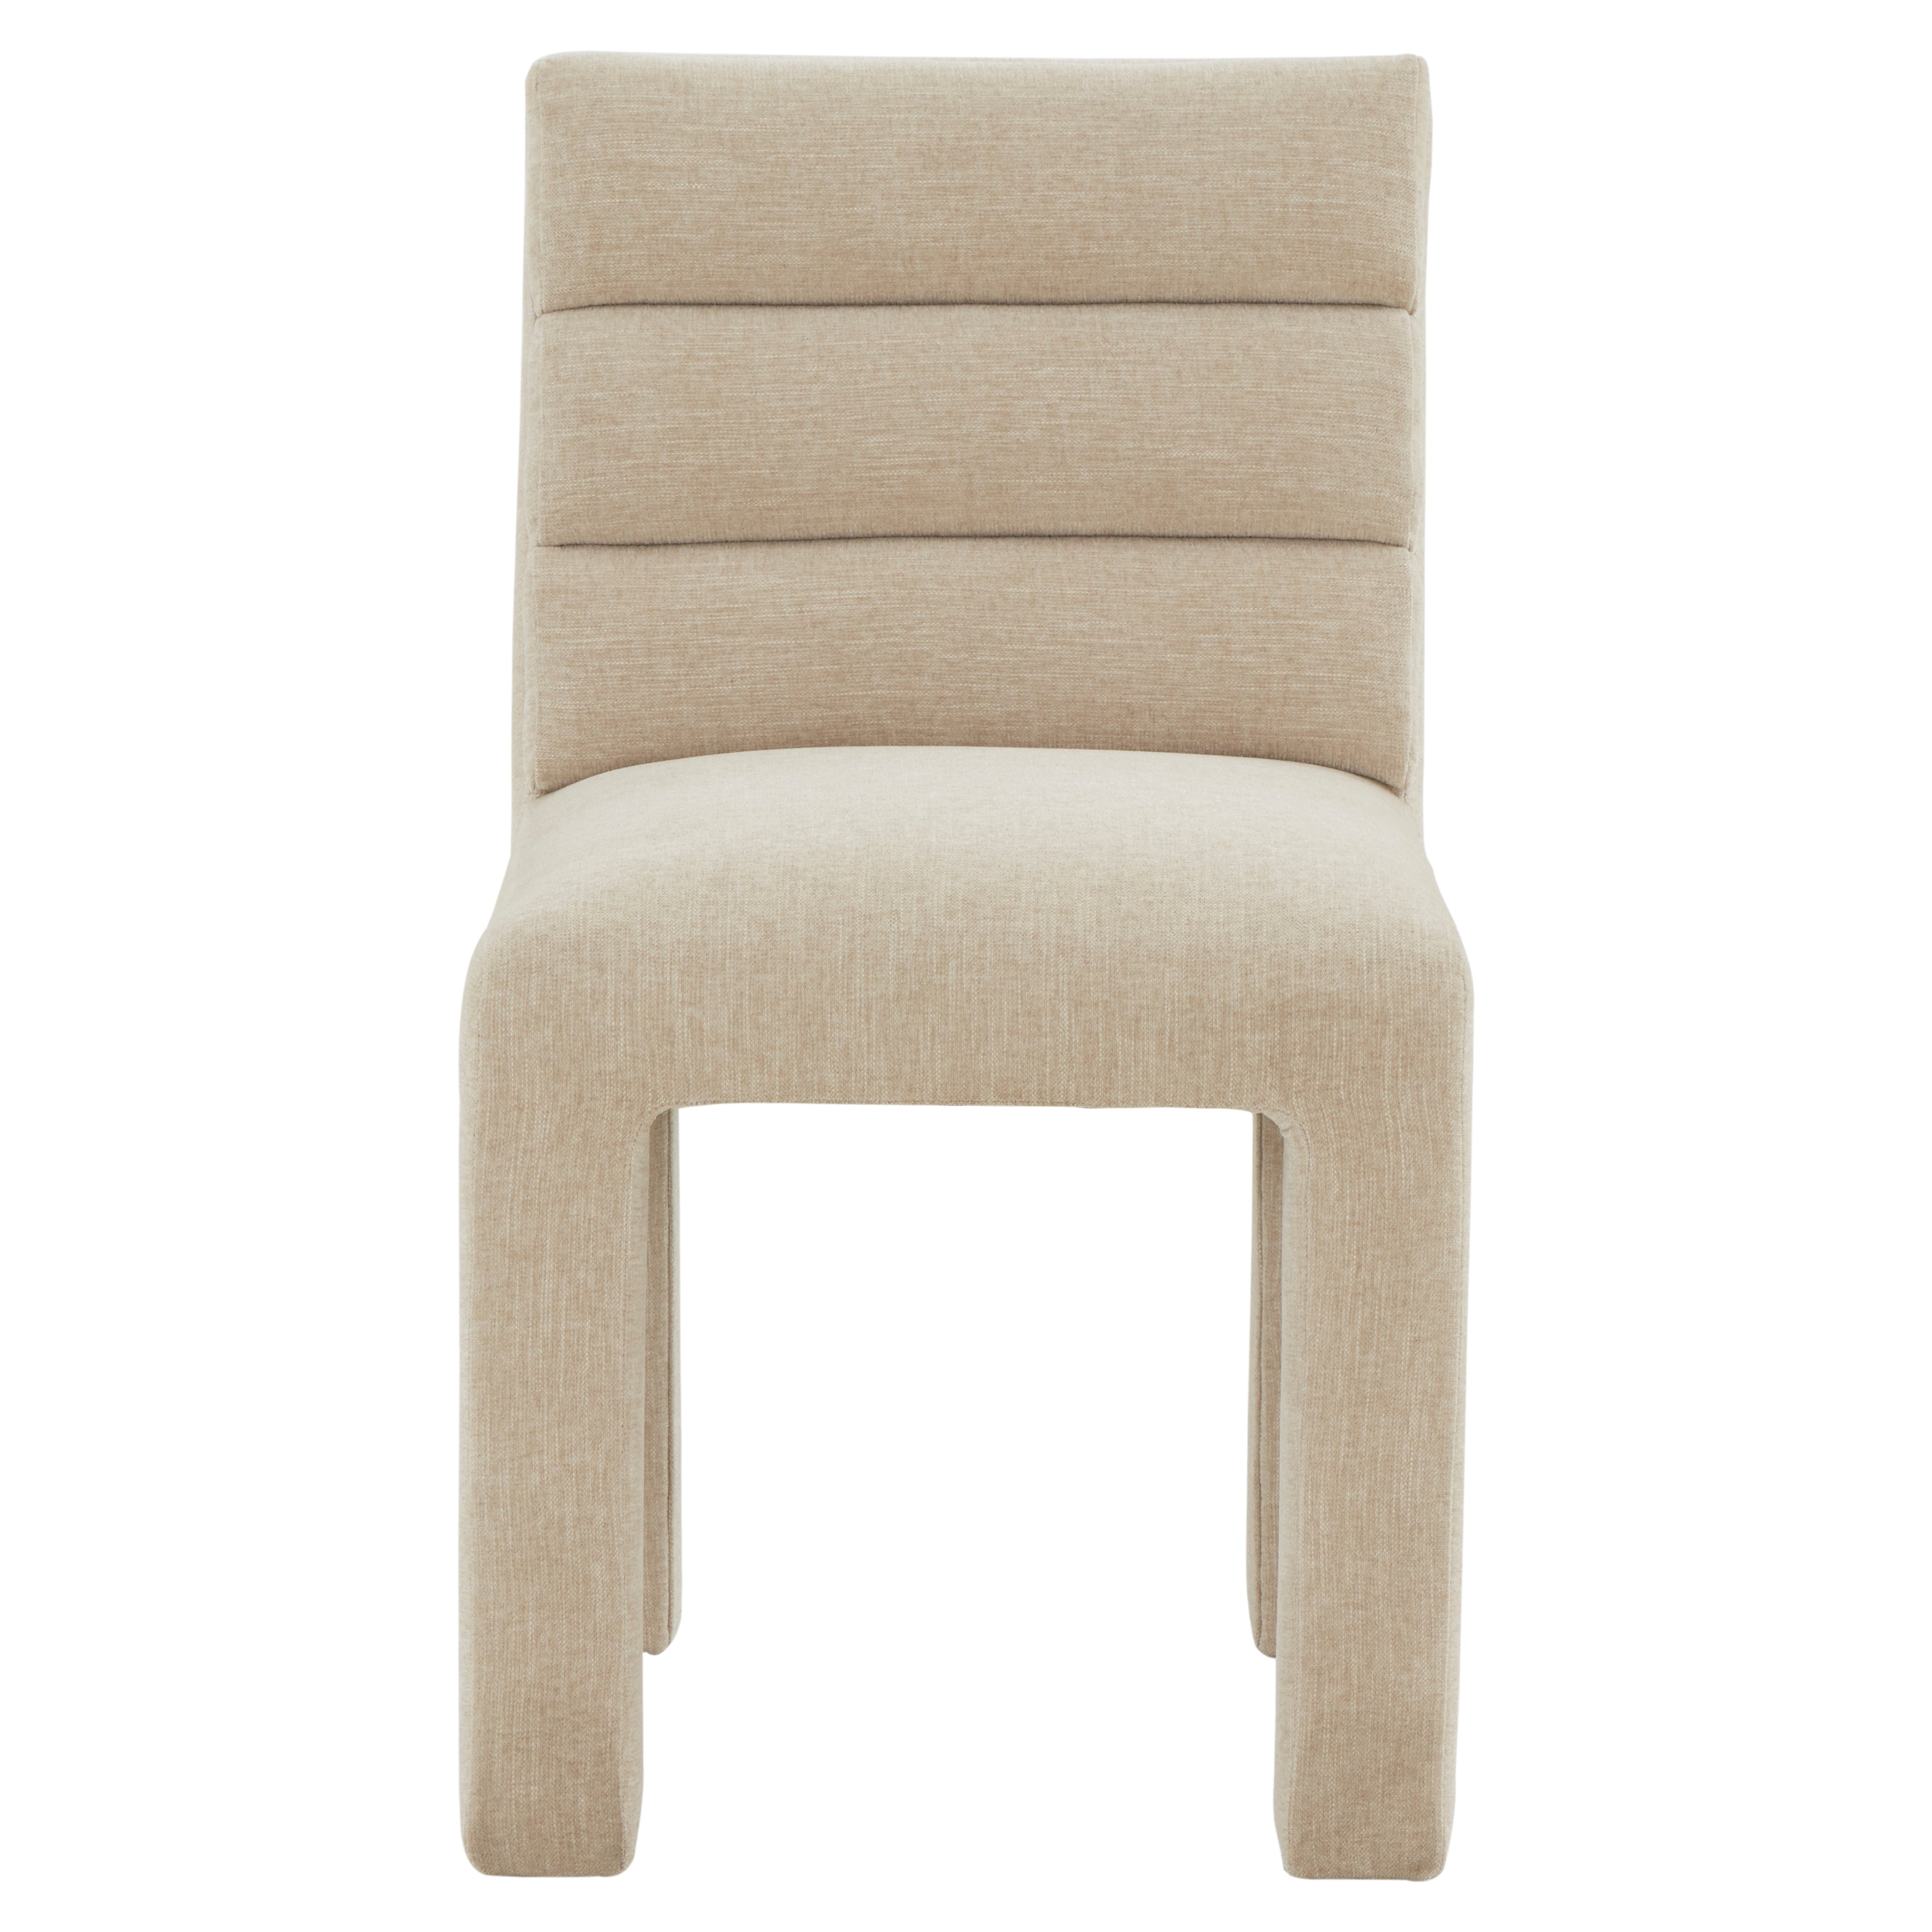 Safavieh Couture Pietro Channel Tufted Dining Chair, SFV5081